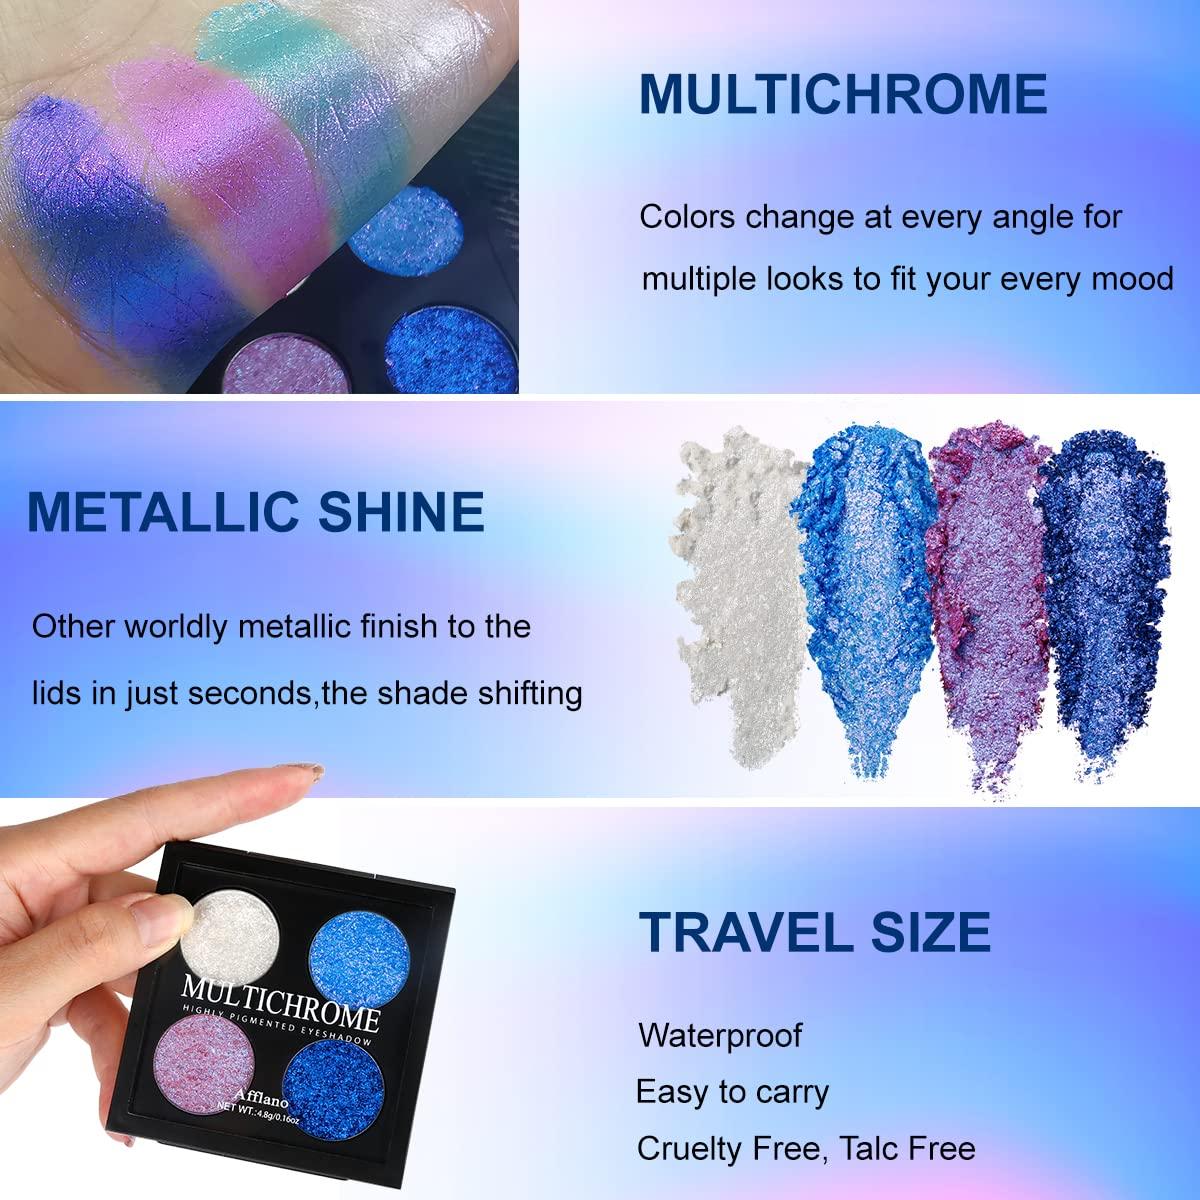 Afflano Duo Chrome Glitter Blue Eyeshadow Intense Color Shifting Metallic  Chameleon Eyeshadow Blue Highly Pigmented Holographic Eyeshadow for Blue  Eyes Makeup Single Sparkling Shimmer Blue Eye Shadow Blue-purple